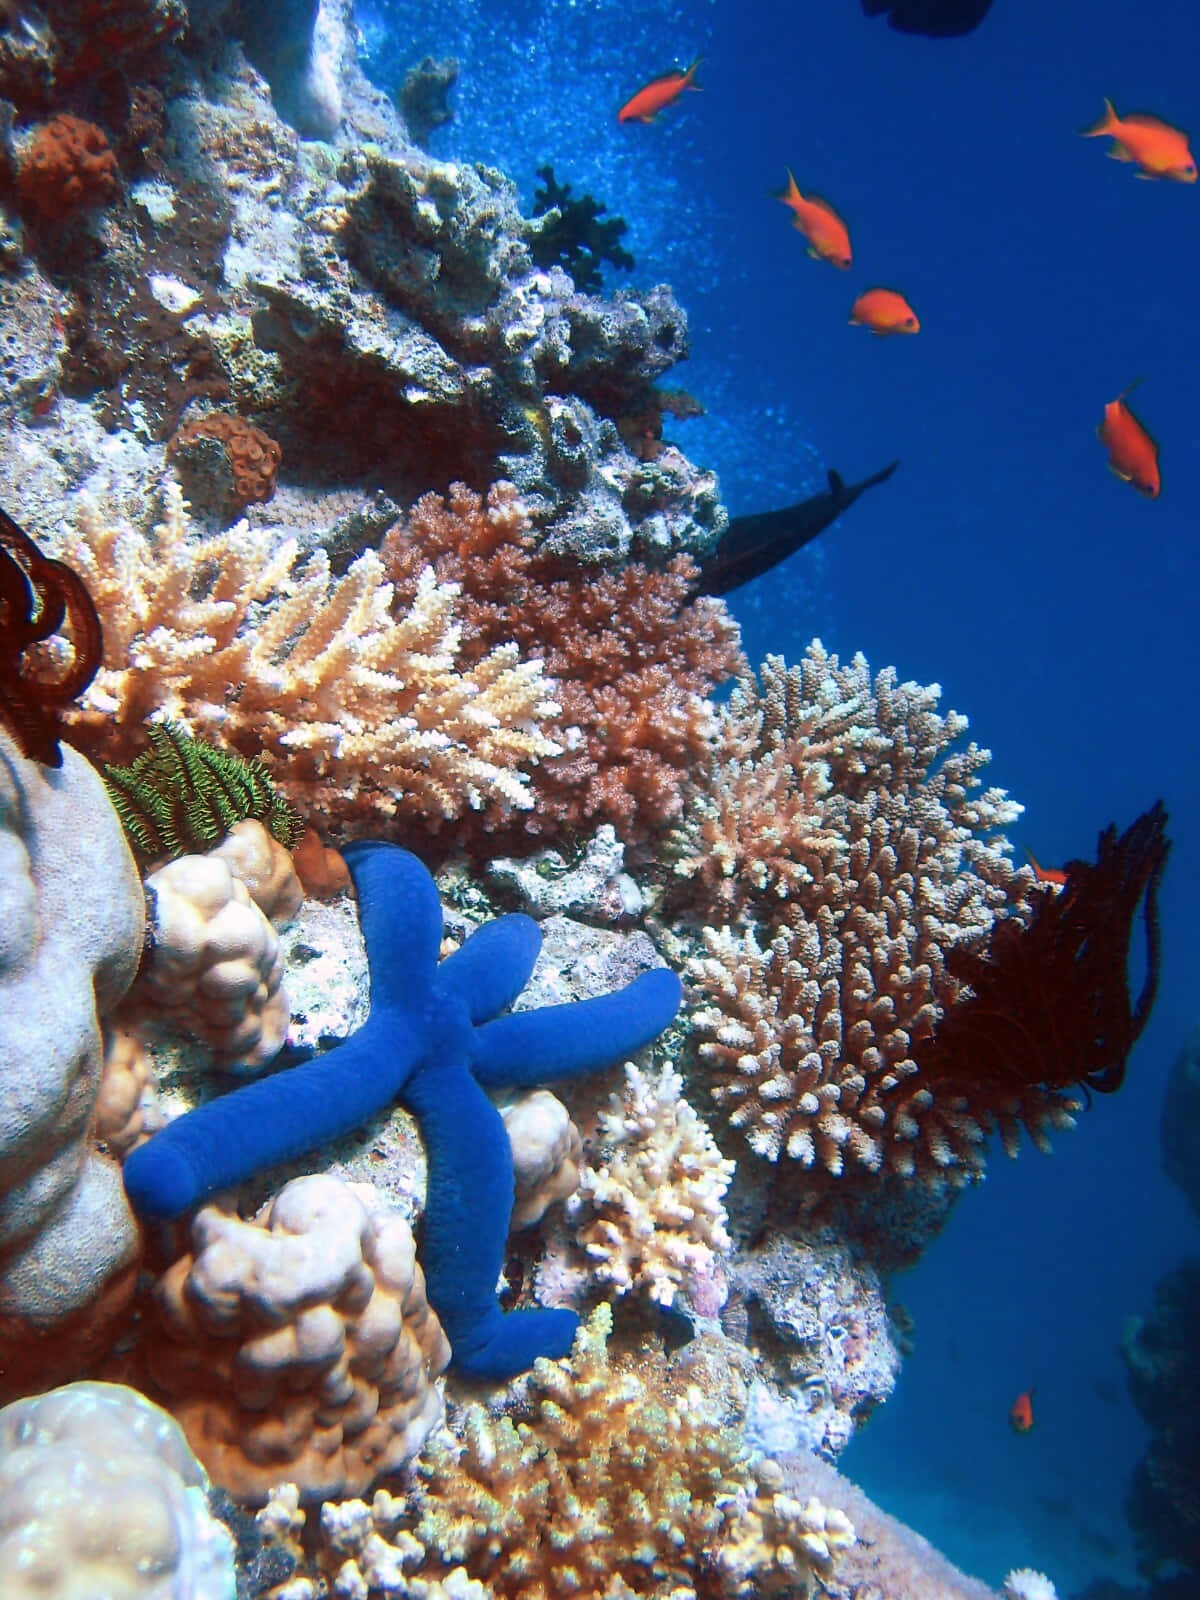 "Explore the vibrant beauty of nature with a visit to a coral reef."